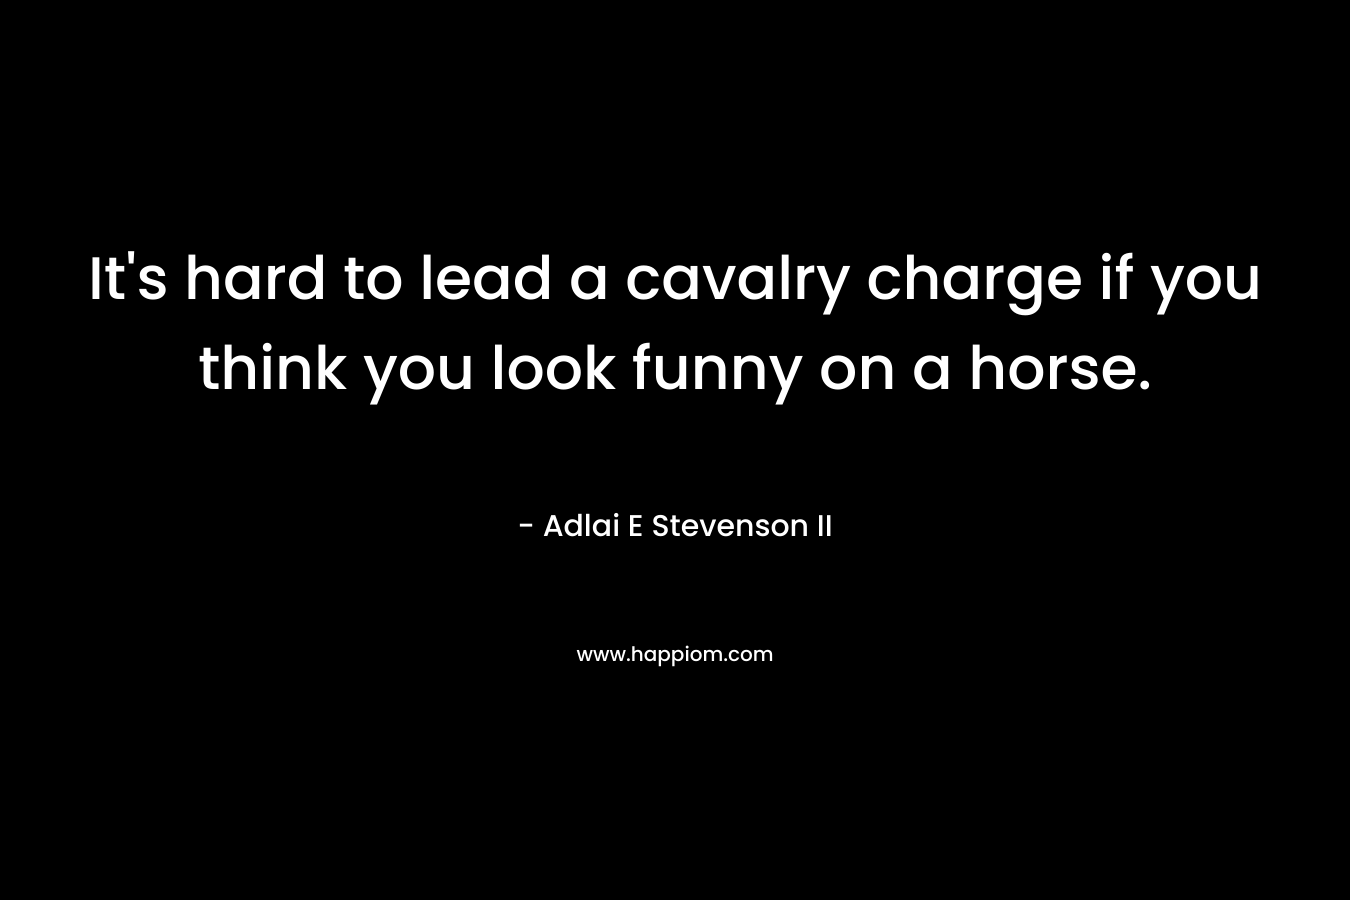 It’s hard to lead a cavalry charge if you think you look funny on a horse. – Adlai E Stevenson II